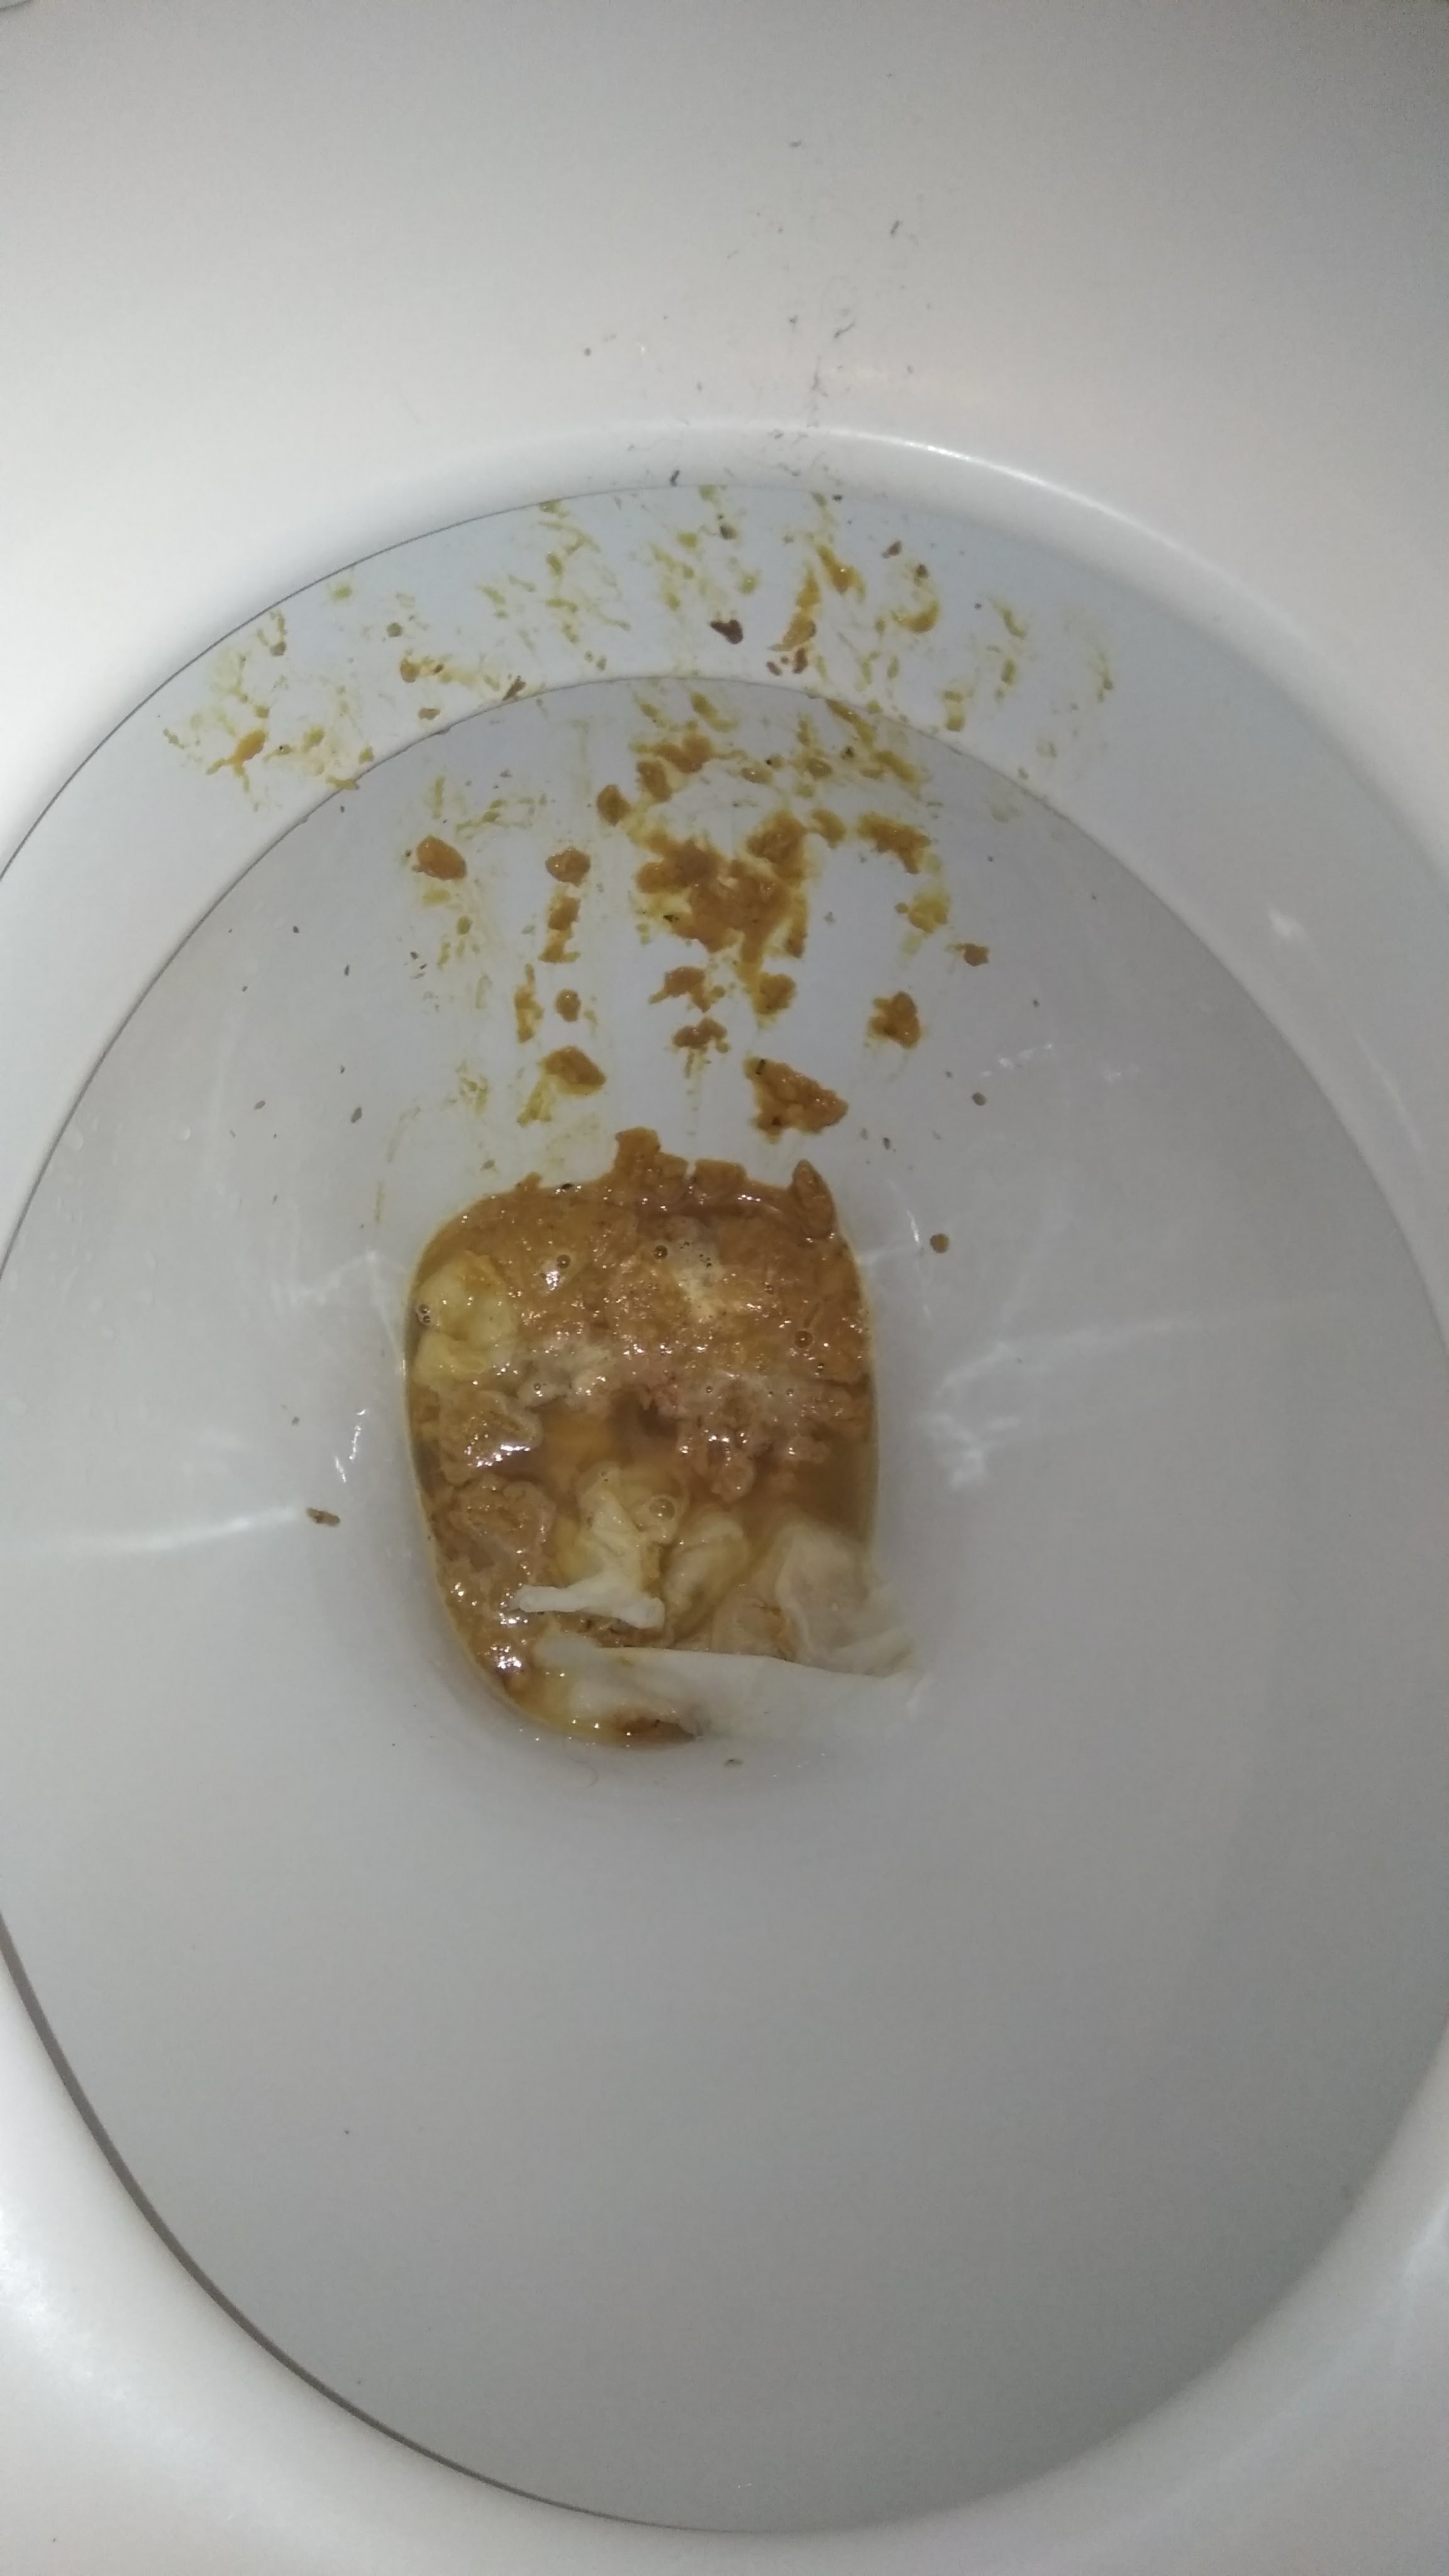 Very loose and sloppy Monday morning shit on my mates toilet